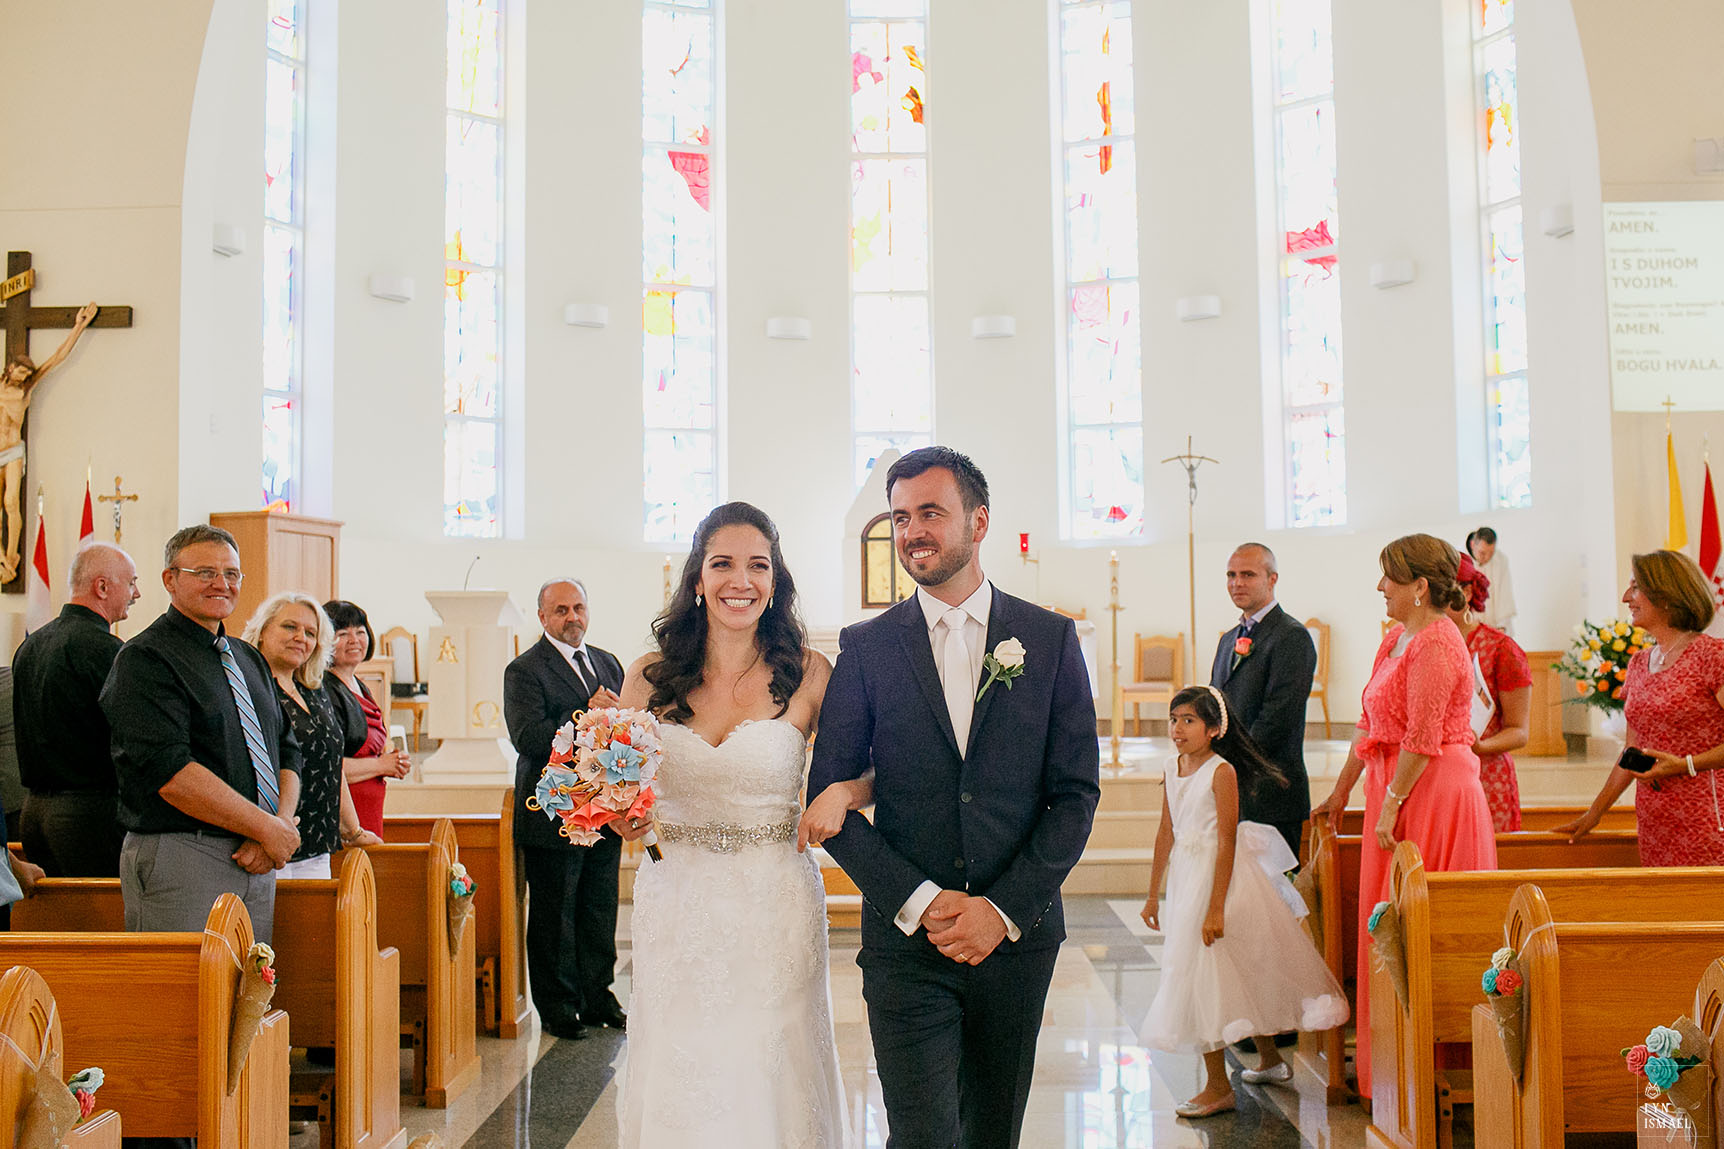 newly wed couple walk down the aisle to help an article about photography restrictions at church weddings